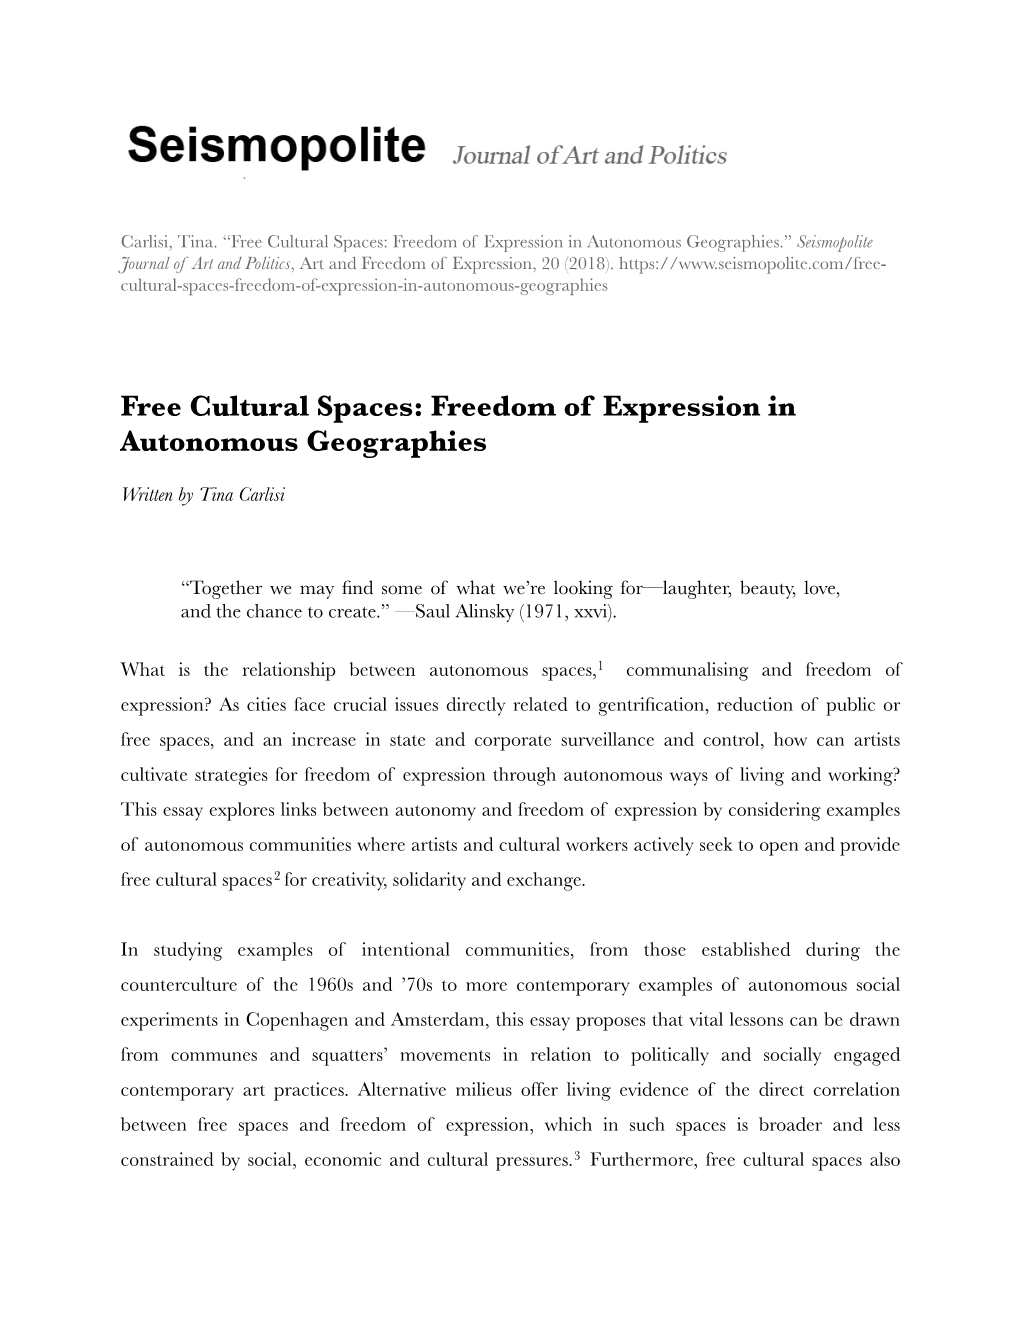 Free Cultural Spaces: Freedom of Expression in Autonomous Geographies.” Seismopolite Journal of Art and Politics, Art and Freedom of Expression, 20 (2018)